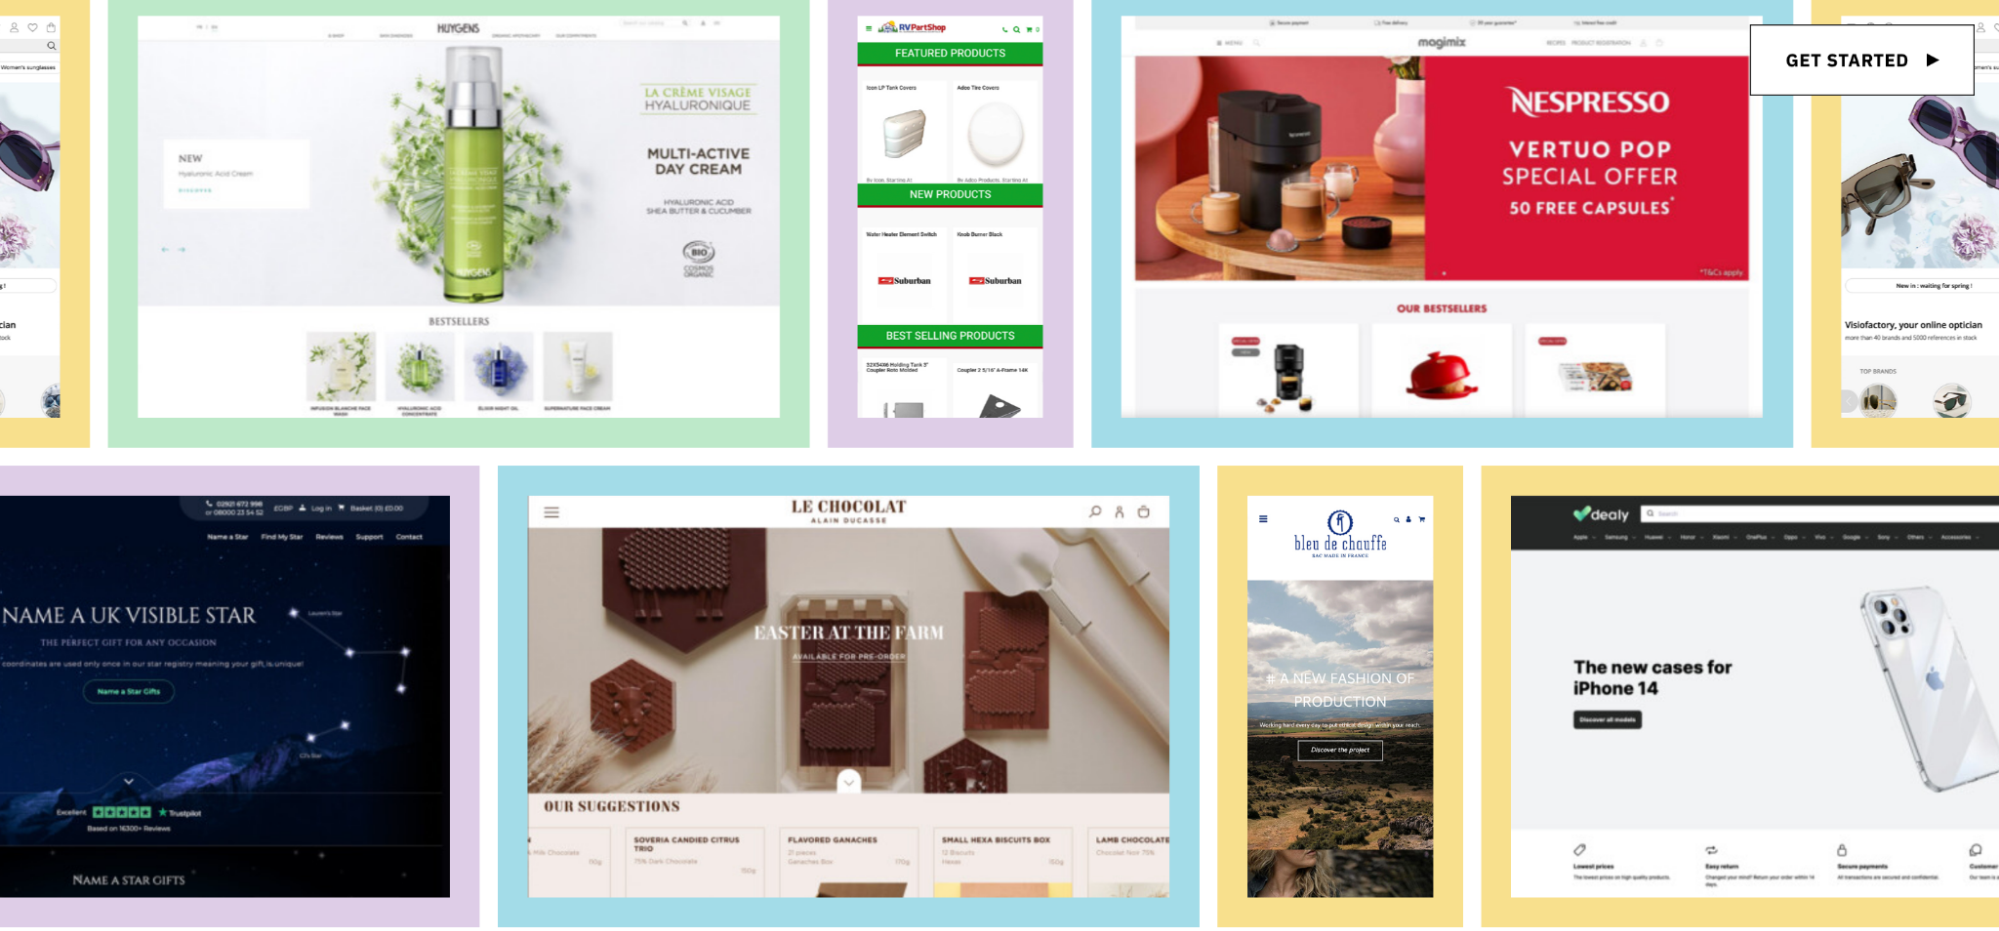 Screenshots of ecommerce storefronts, including images of coffee, chocolate, and cosmetics stores.